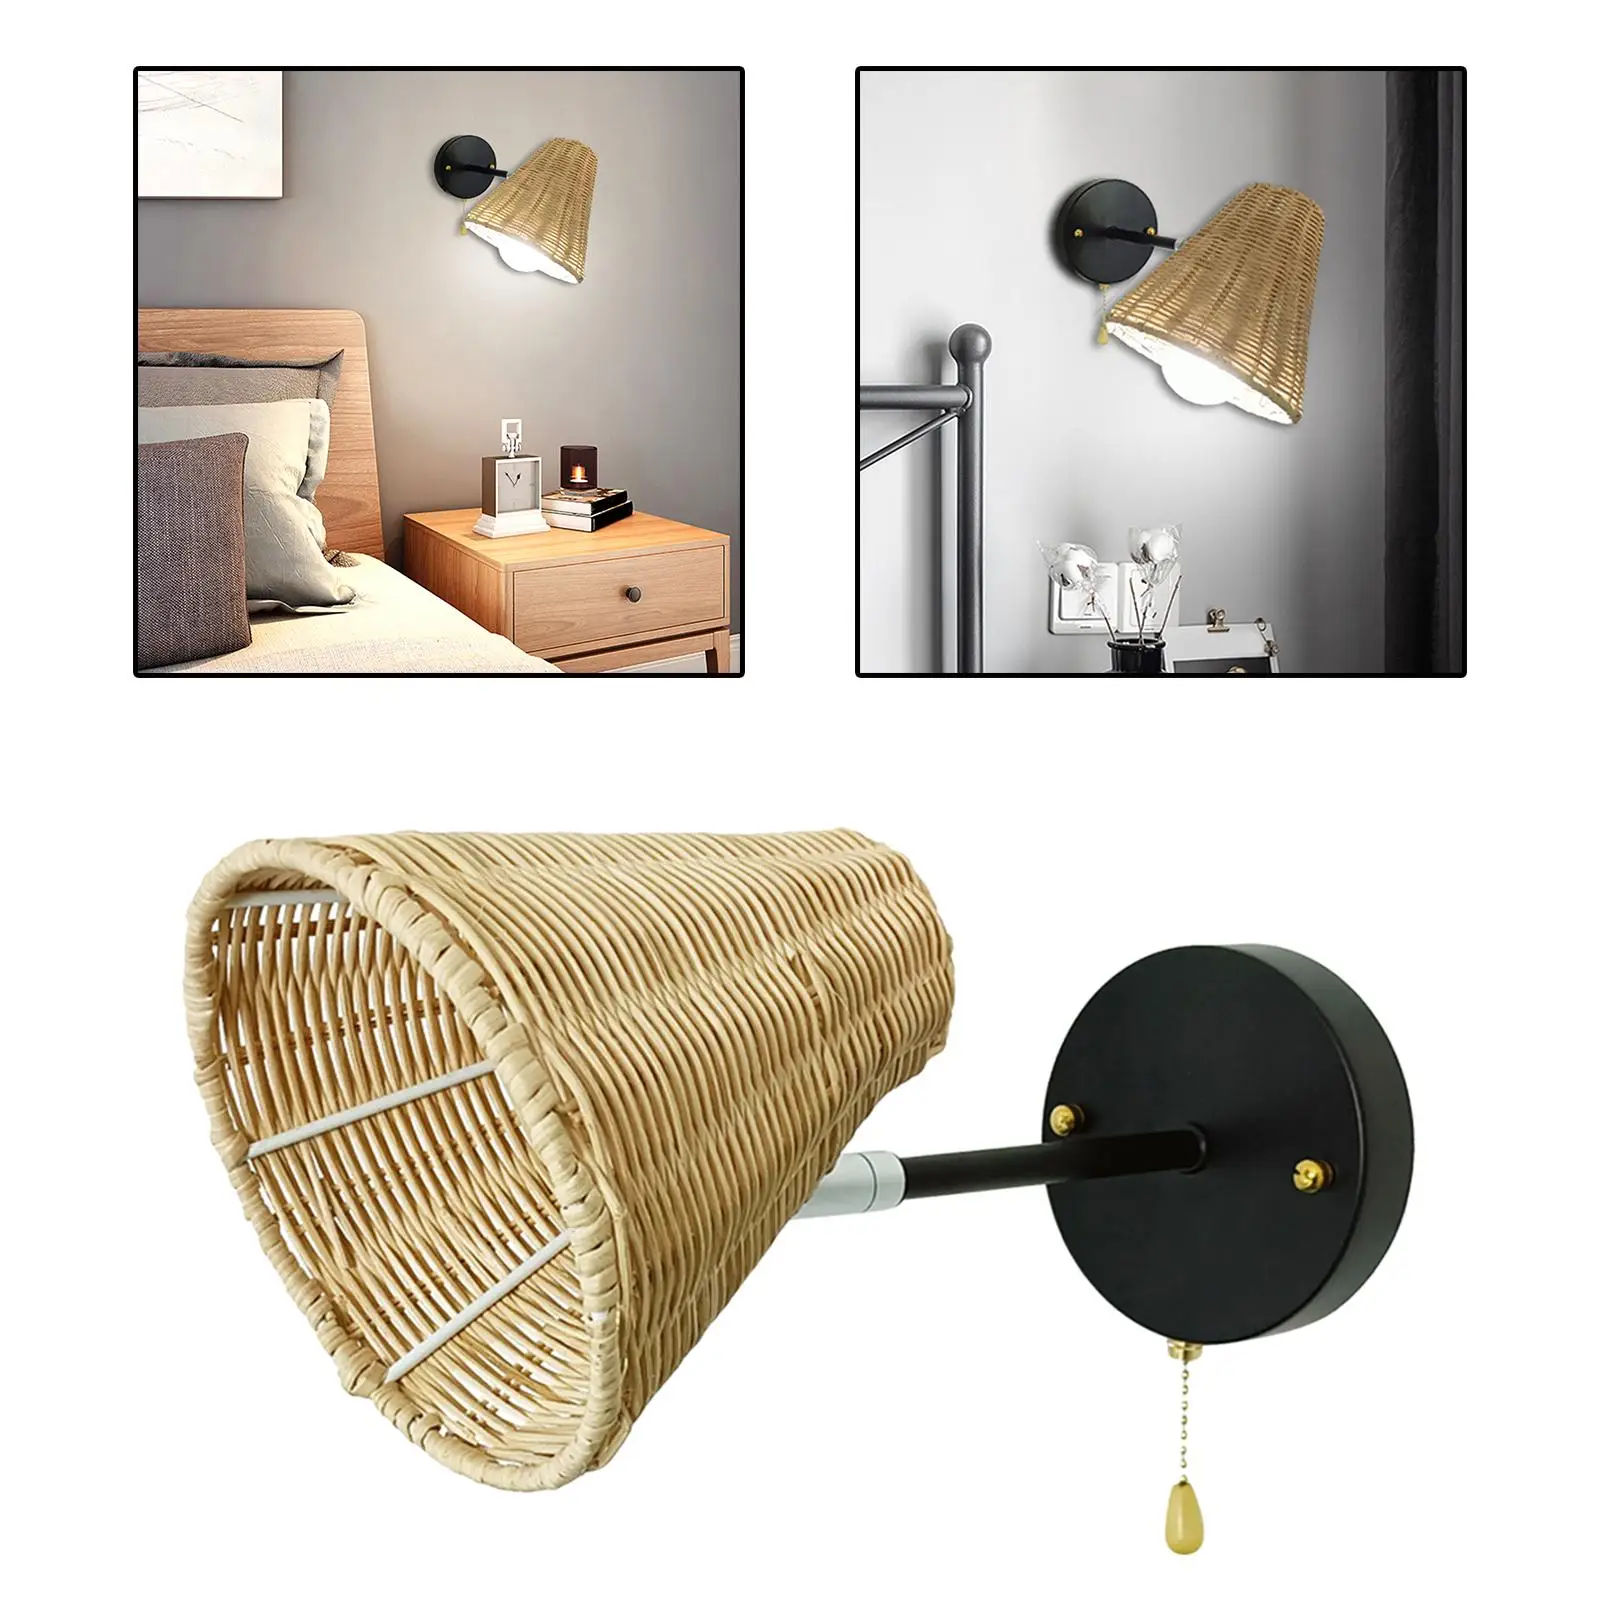 Rattan Wall Lamp Light Sconce W/ Pull Chain Switch Home Living Room Decor